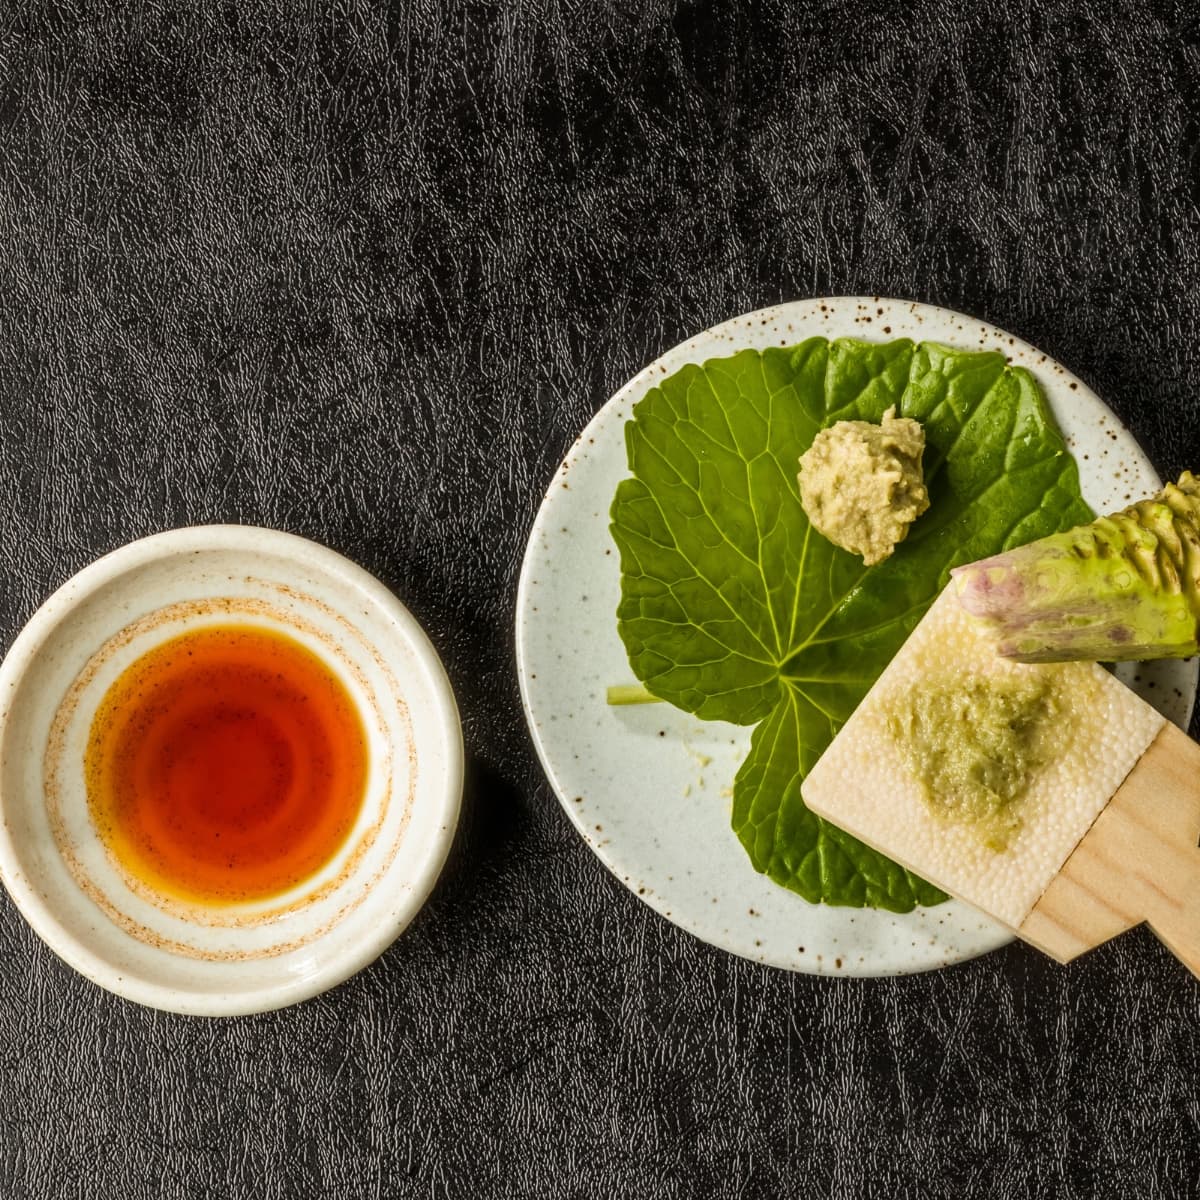 Japanese Wasabi Root and Paste with Grinder on a Bowl with Bowl of Sauce to  the Side